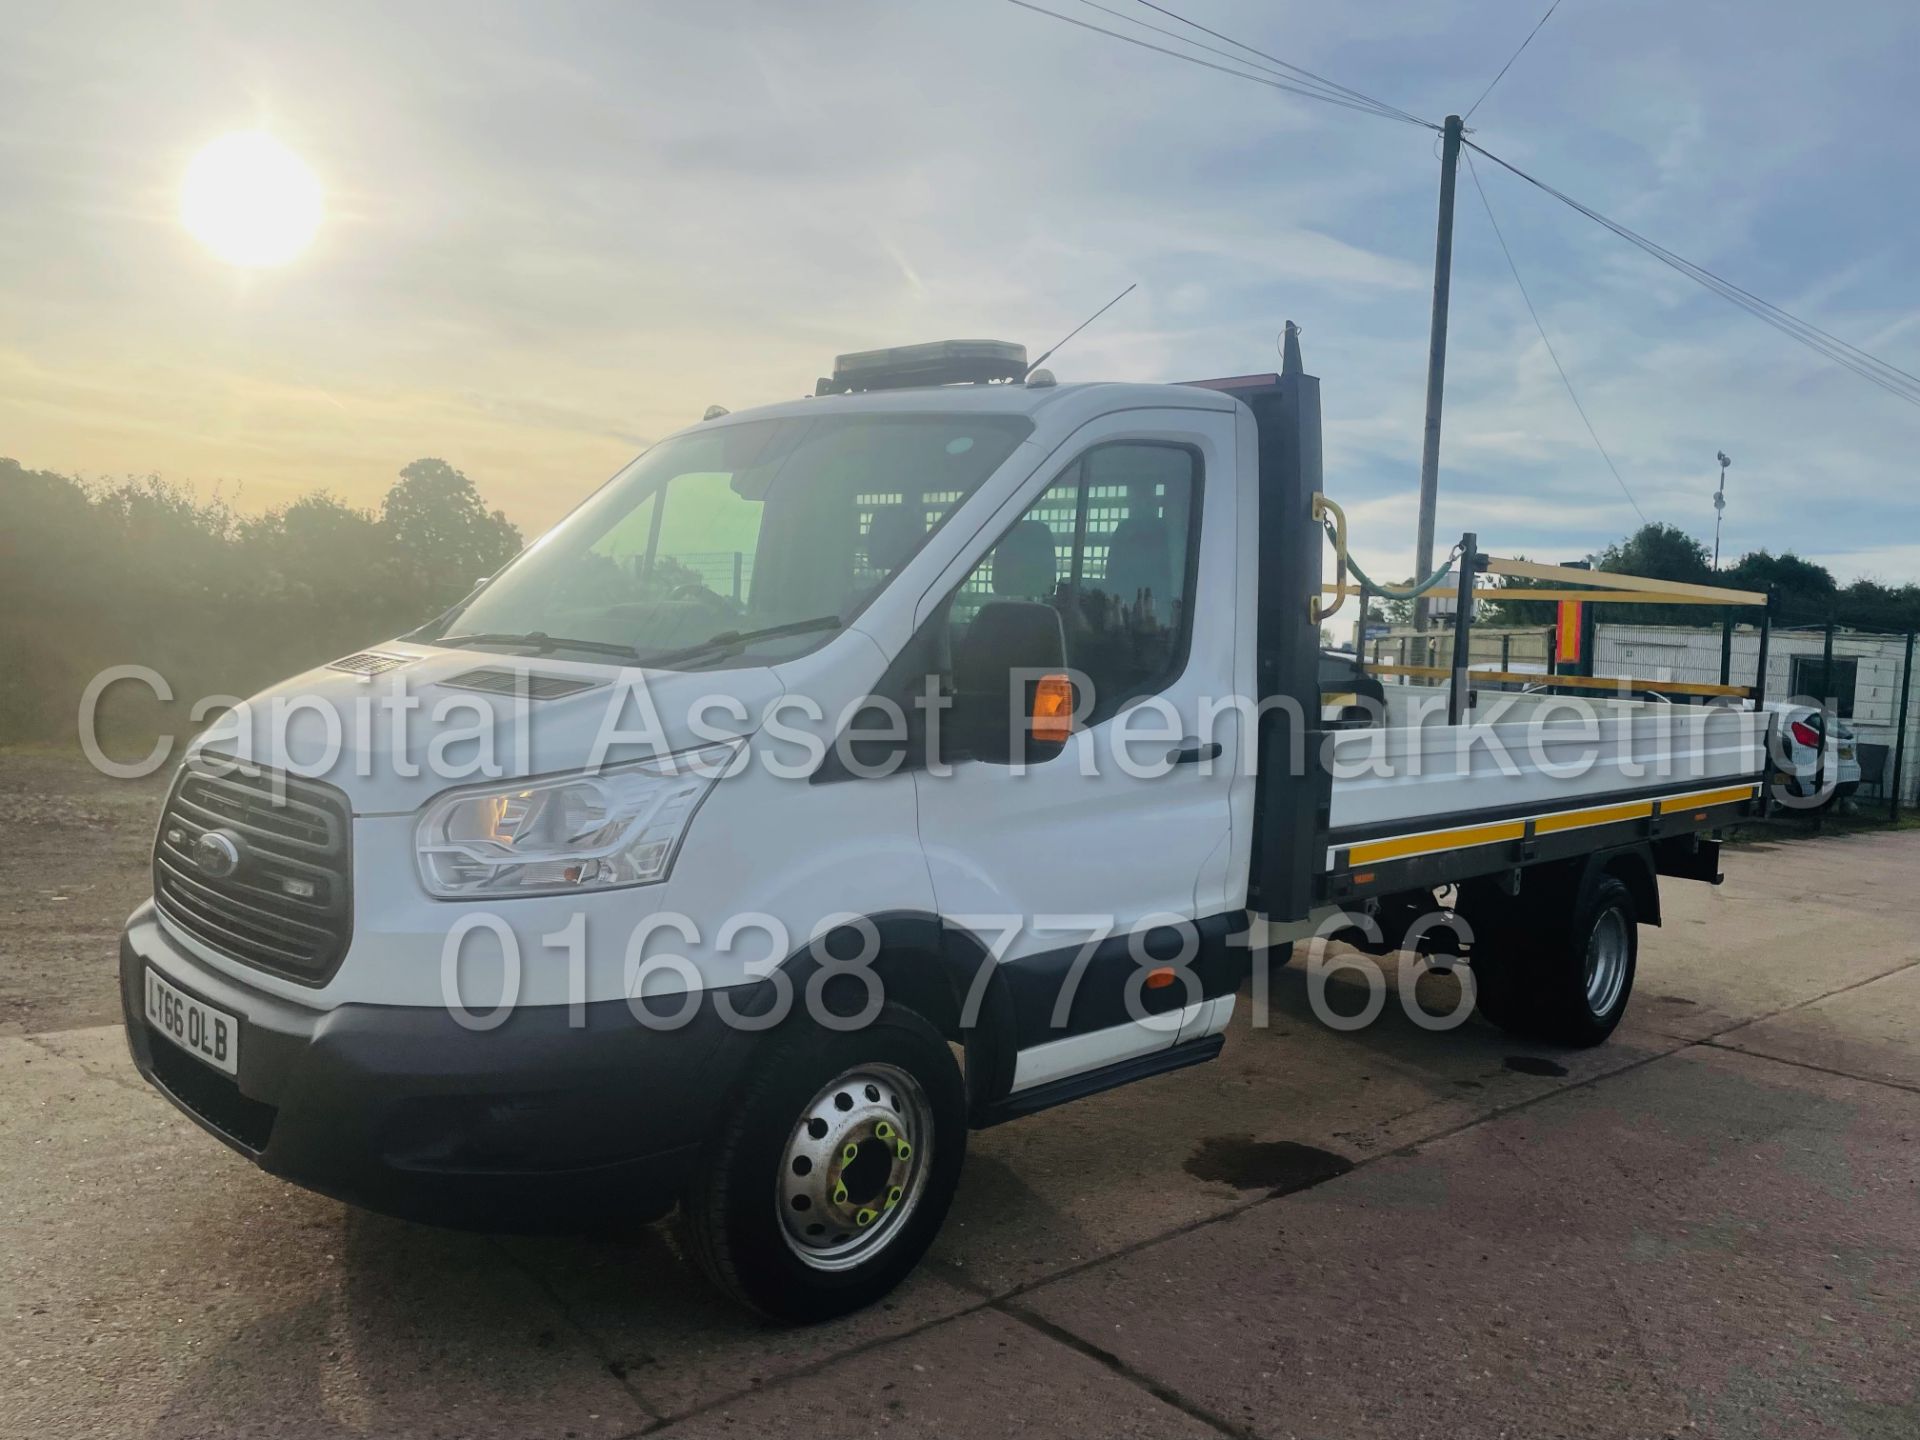 (On Sale) FORD TRANSIT 125 T350 *L4 - XLWB DROPSIDE TRUCK* (2017 - EURO 6) '2.2 TDCI - 6 SPEED' - Image 6 of 40